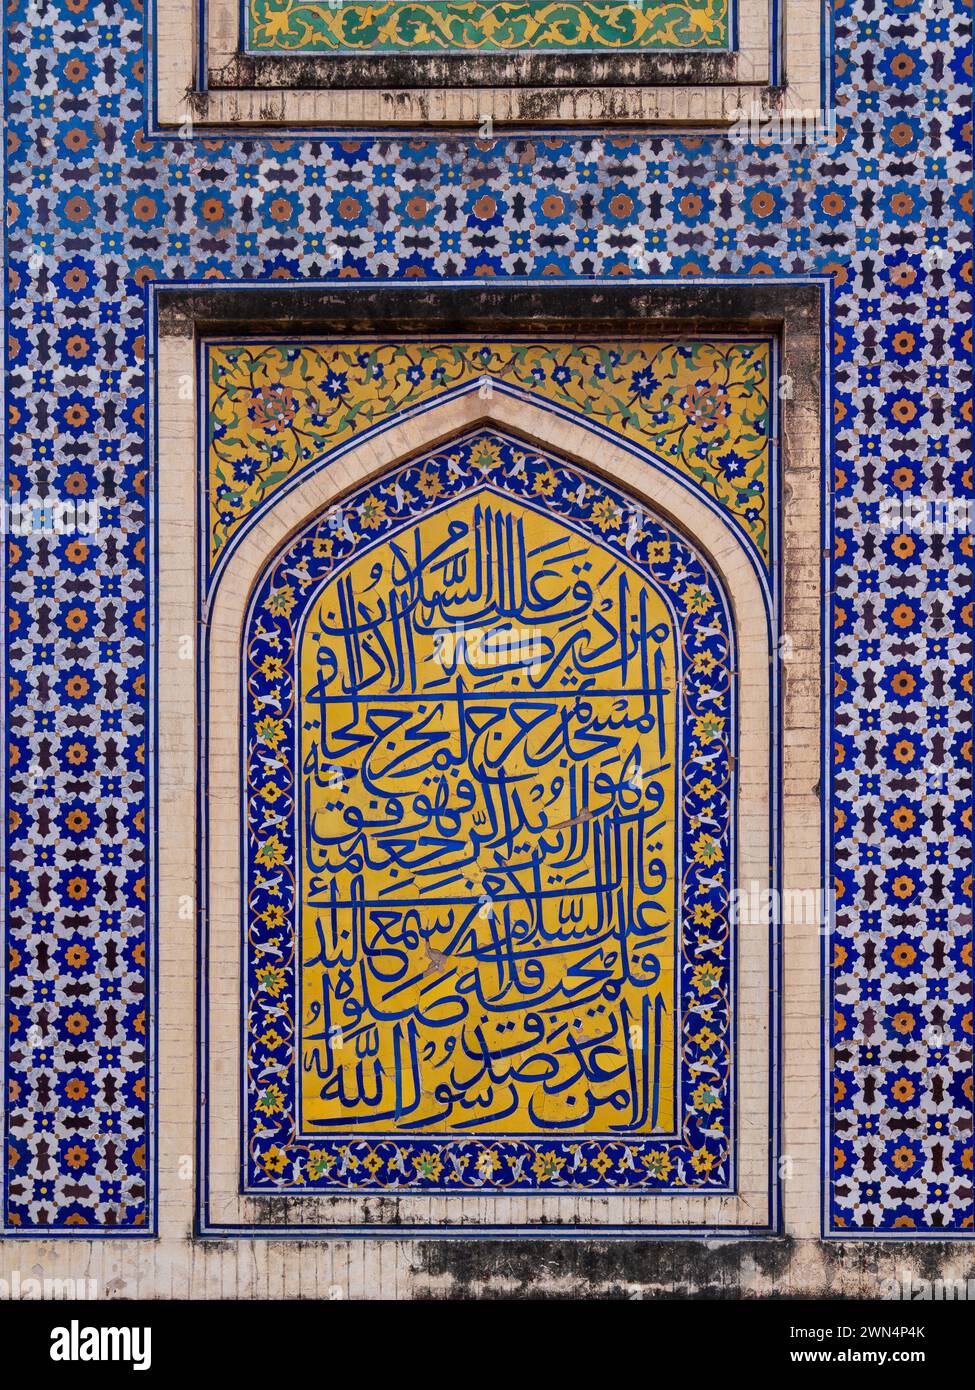 Arabic calligraphy at the historic Masjid Wazir Khan mosque in Lahore, Pakistan. Stock Photo